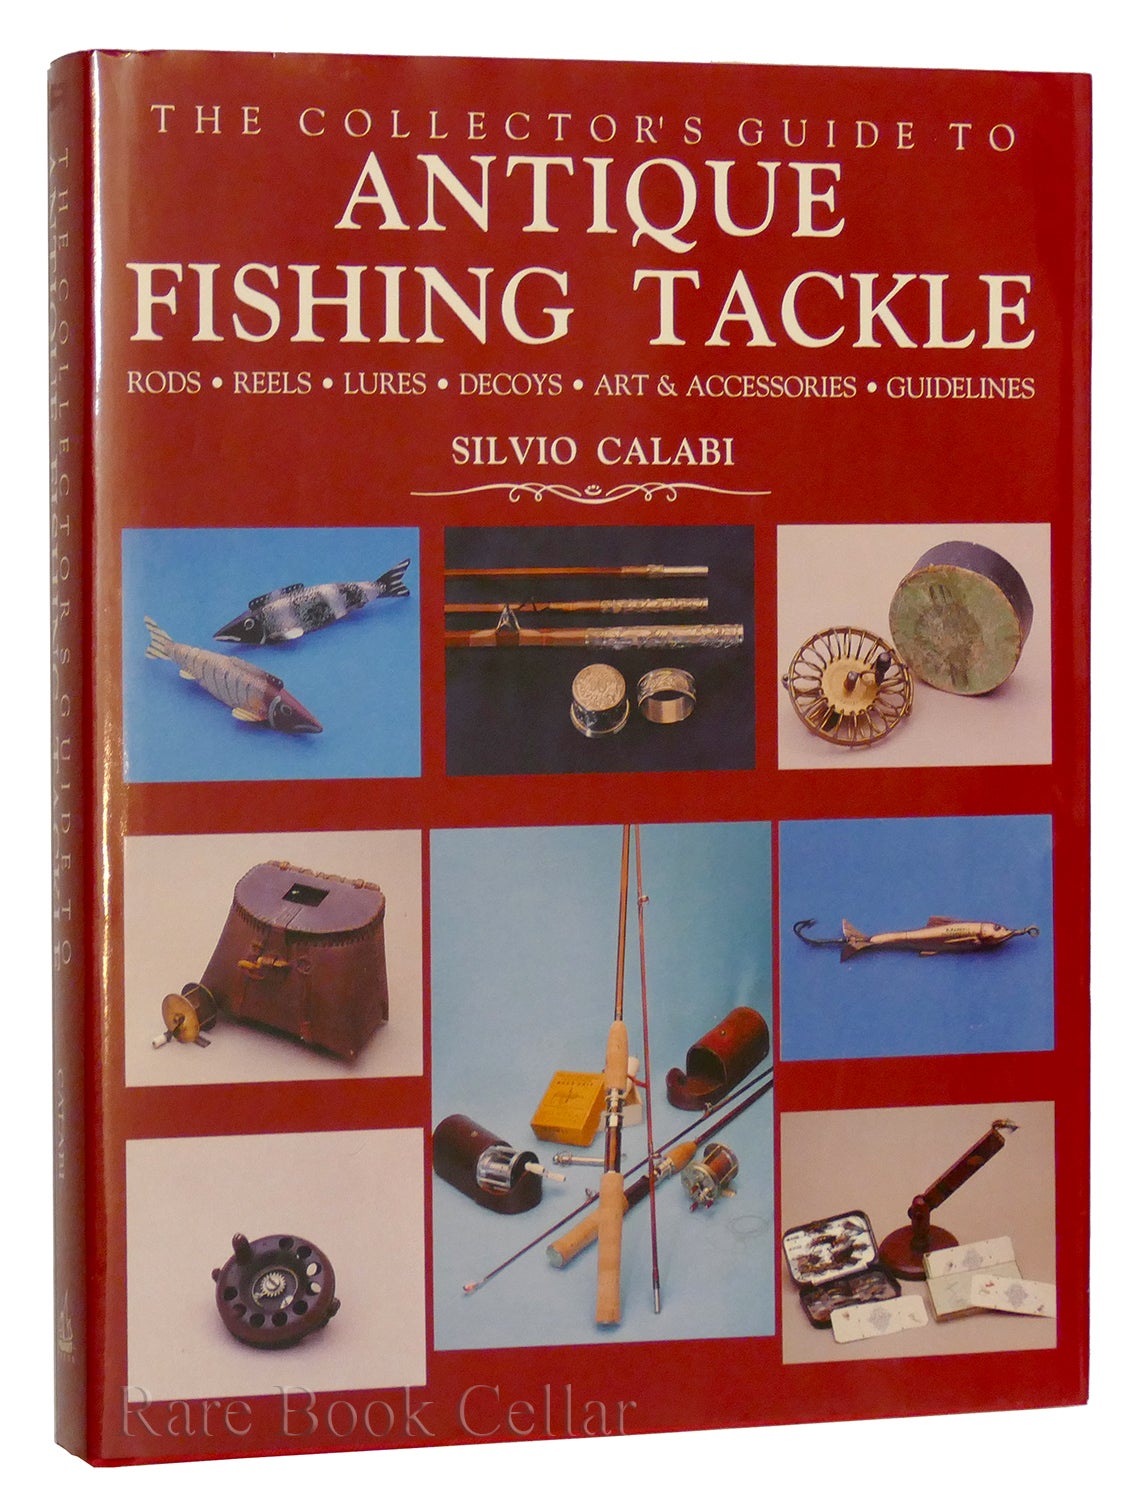 THE COLLECTORS GUIDE TO ANTIQUE FISHING TACKLE